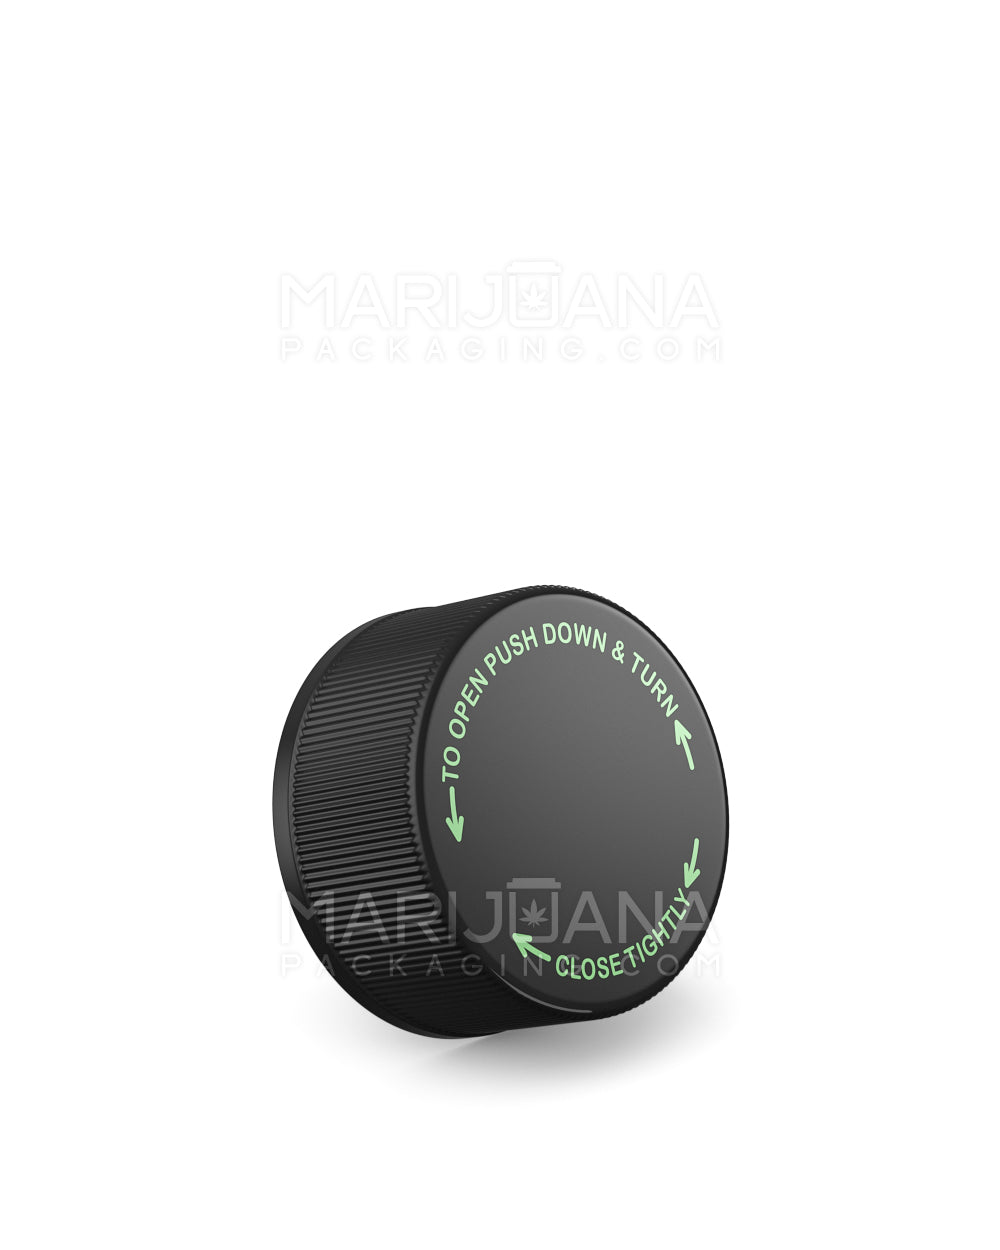 Child Resistant Ribbed Push Down & Turn Plastic Caps w/ Text | 28mm - Glossy Black | Sample - 1